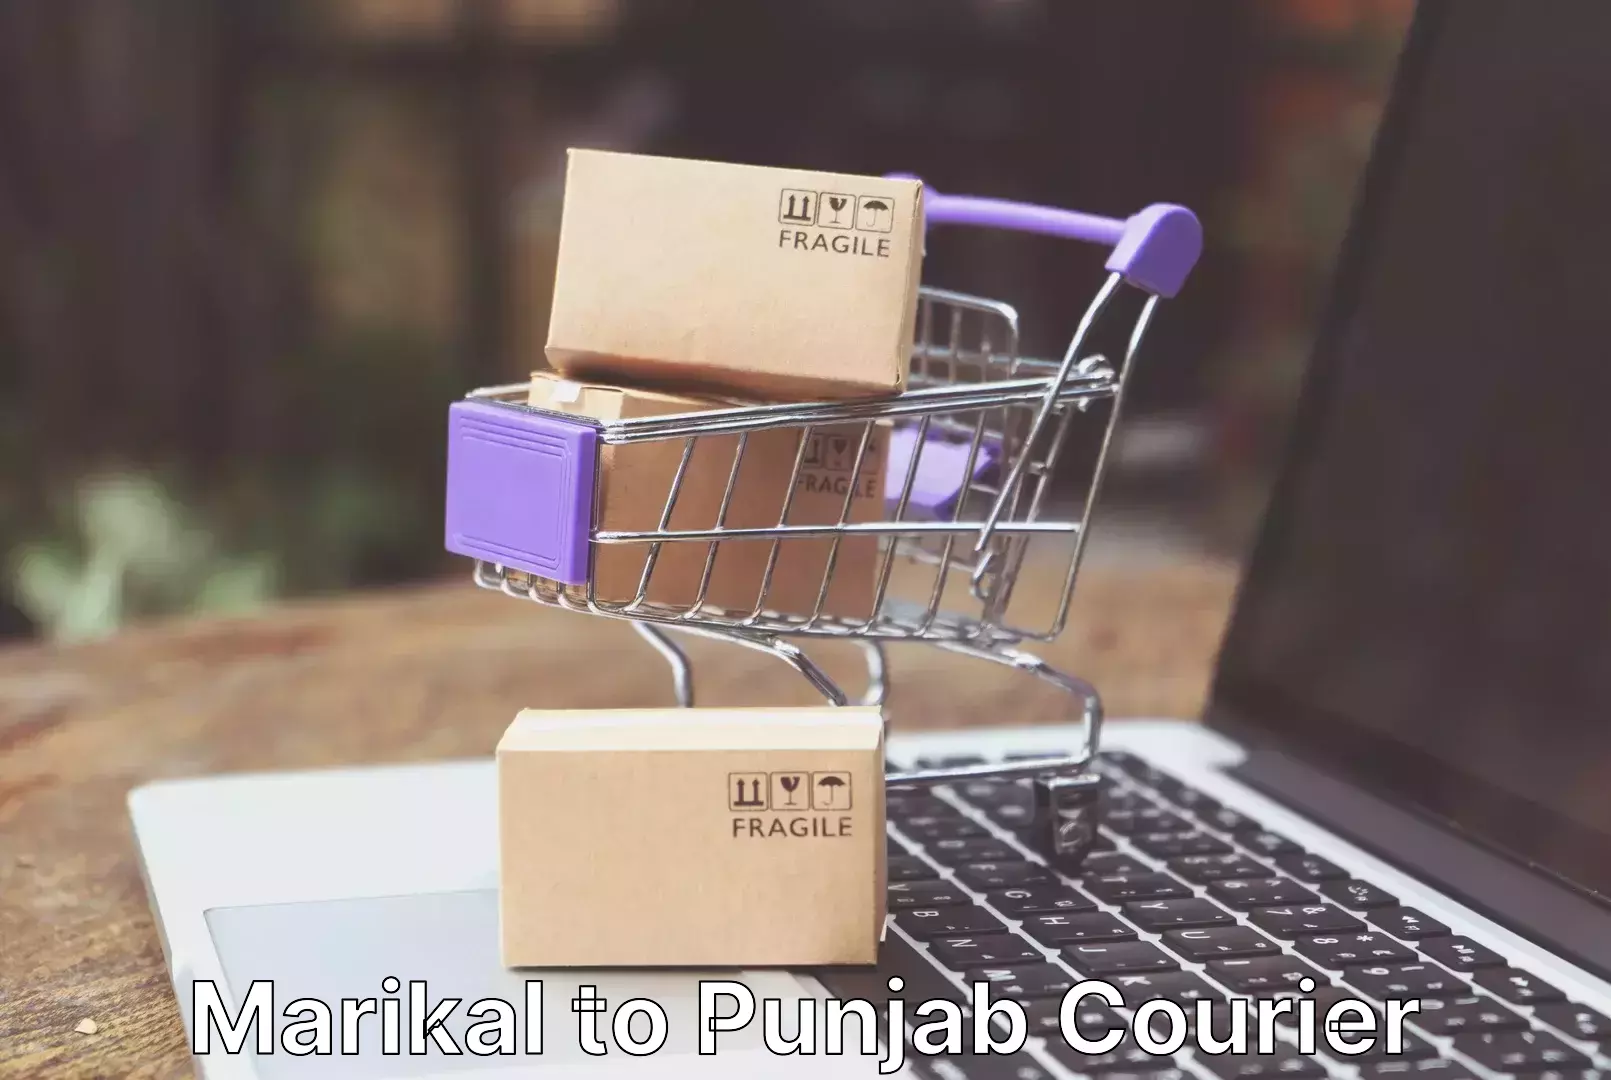 High-quality moving services Marikal to Punjab